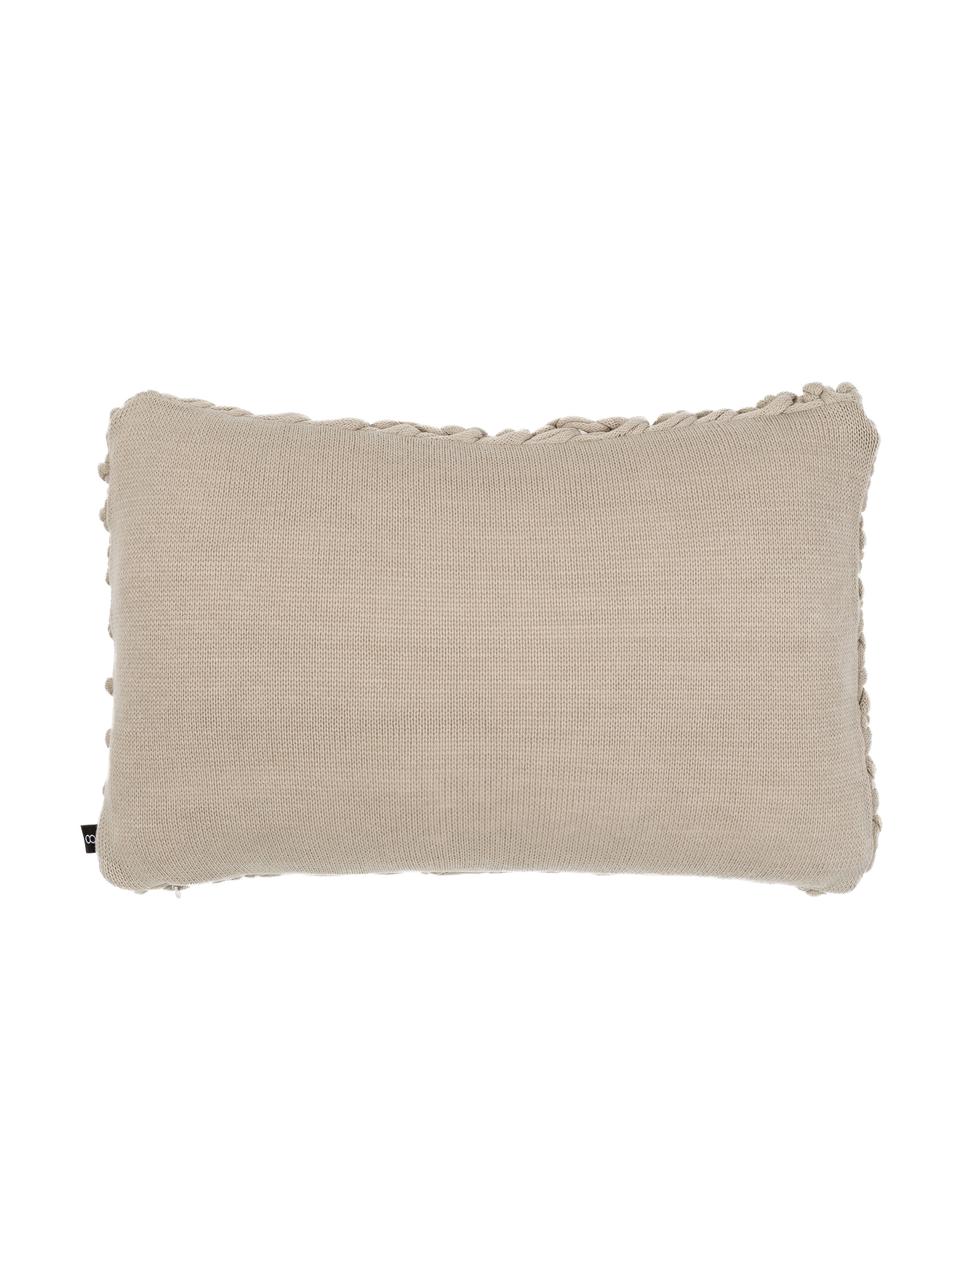 Coussin rectangulaire beige en tricot Chunky, Beige